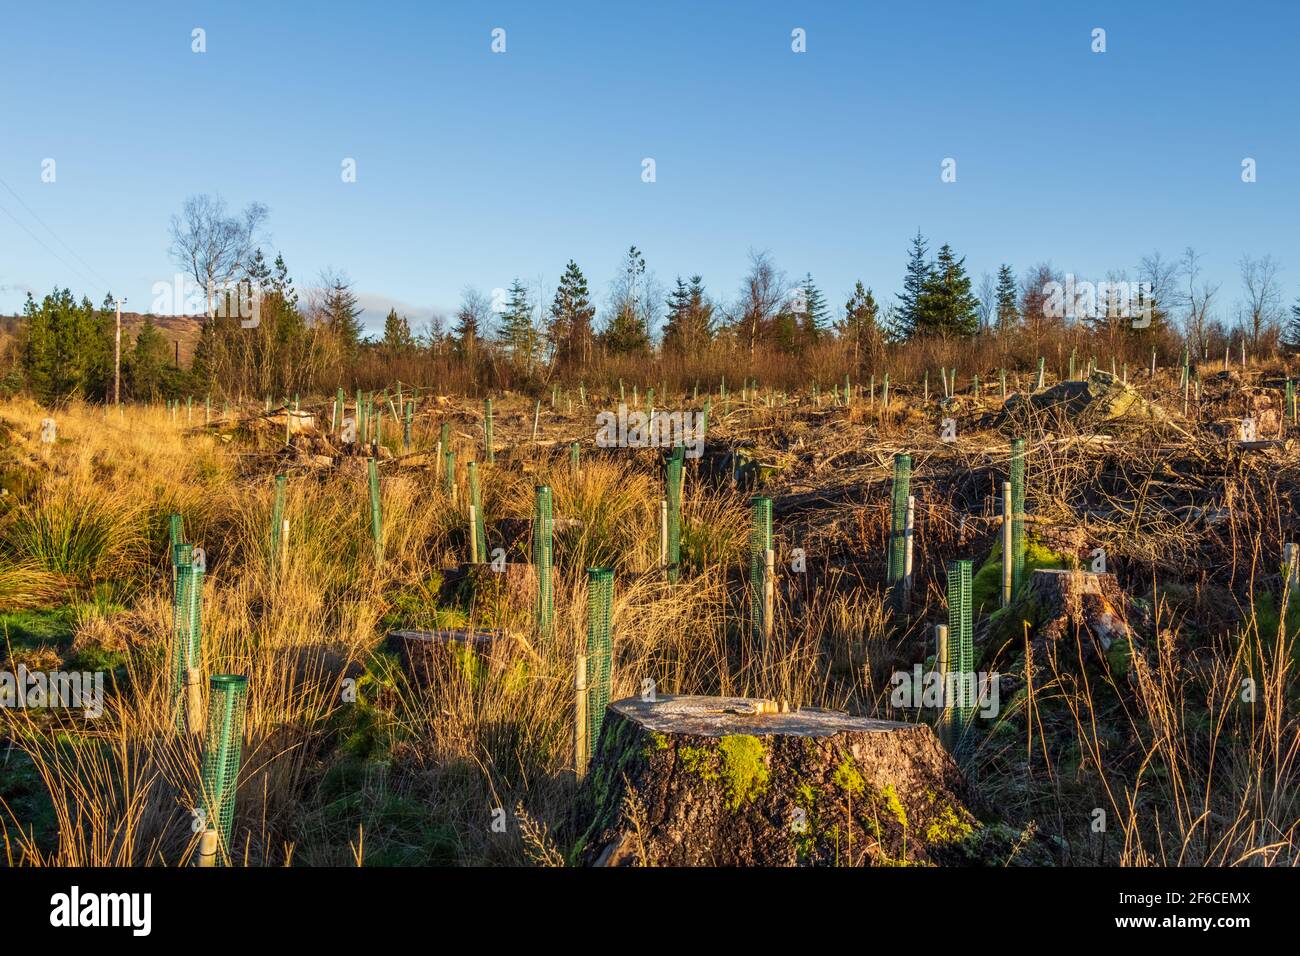 Replanting an old deforested and clear felled coniferous forest with broadleaf trees in tree guard in Scotland Stock Photo